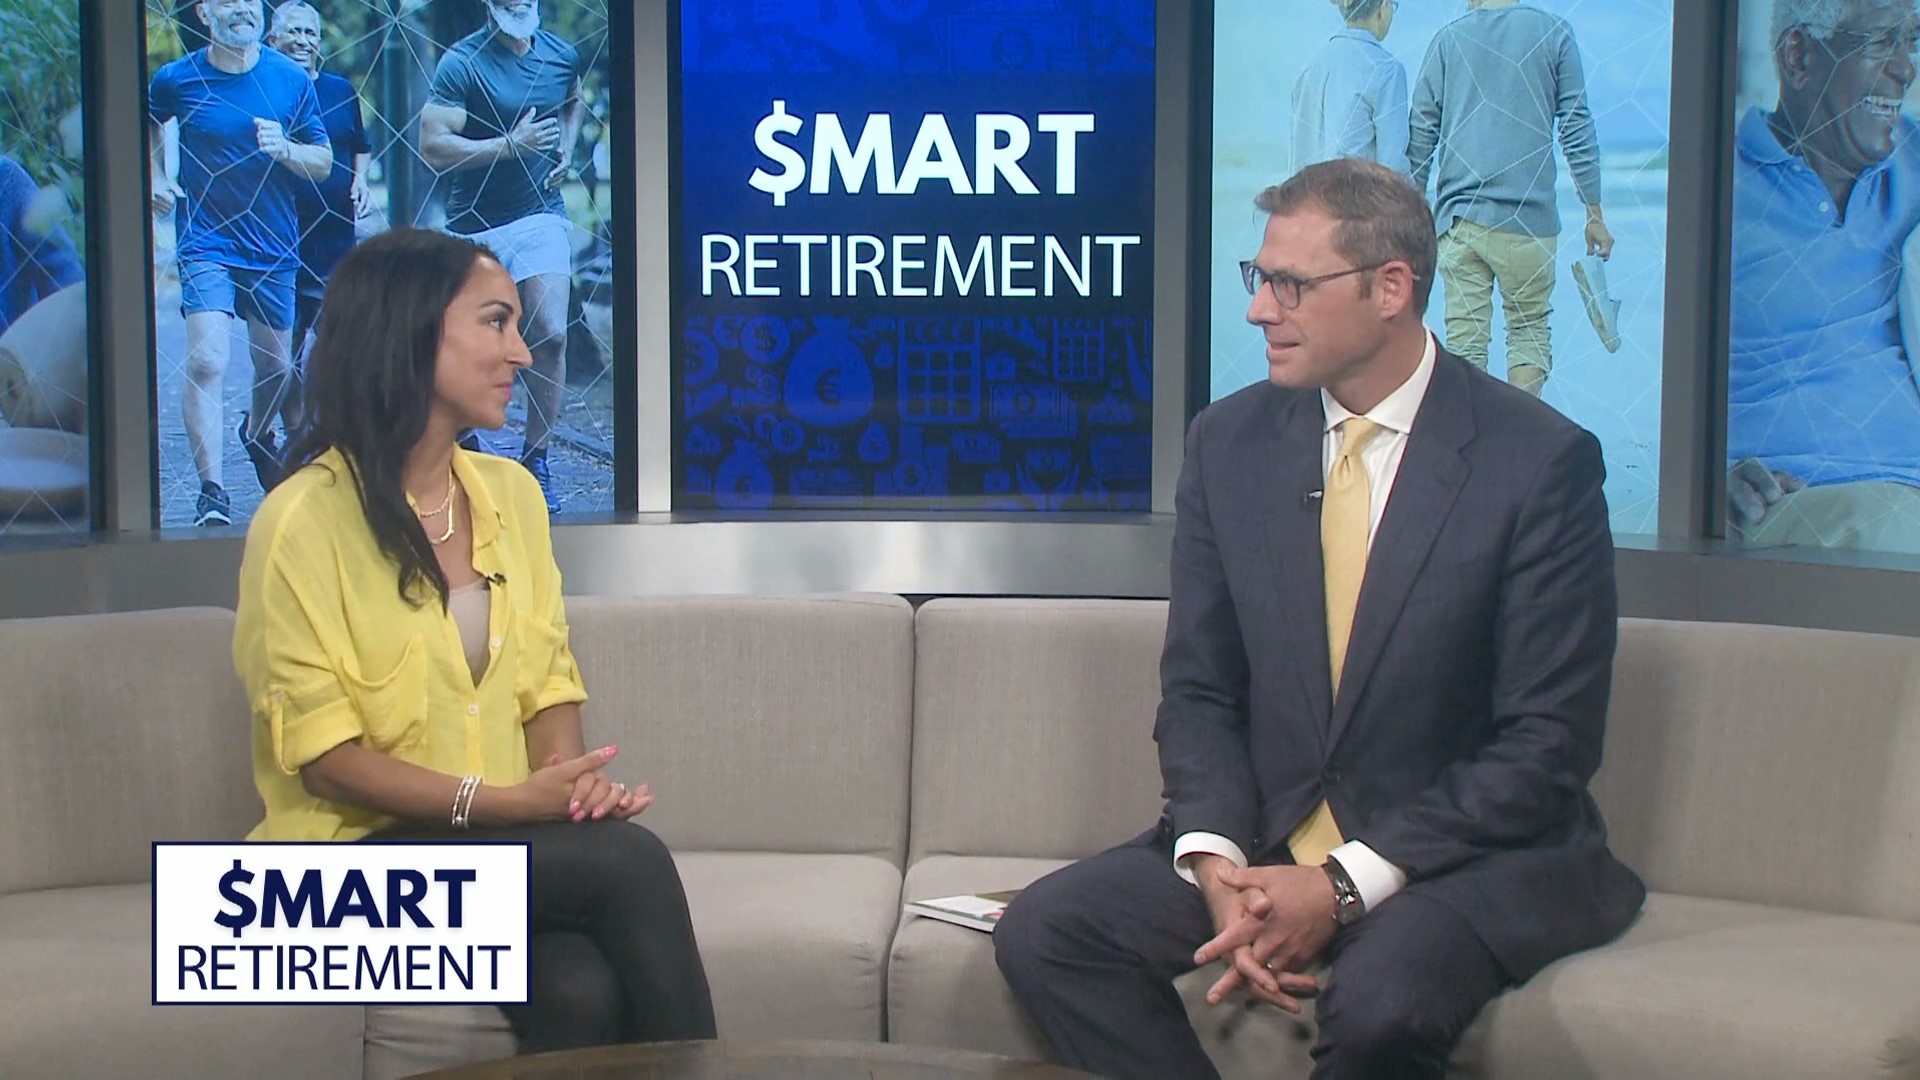 Learn how to make Smart Decisions to Secure your Finances in Retirement